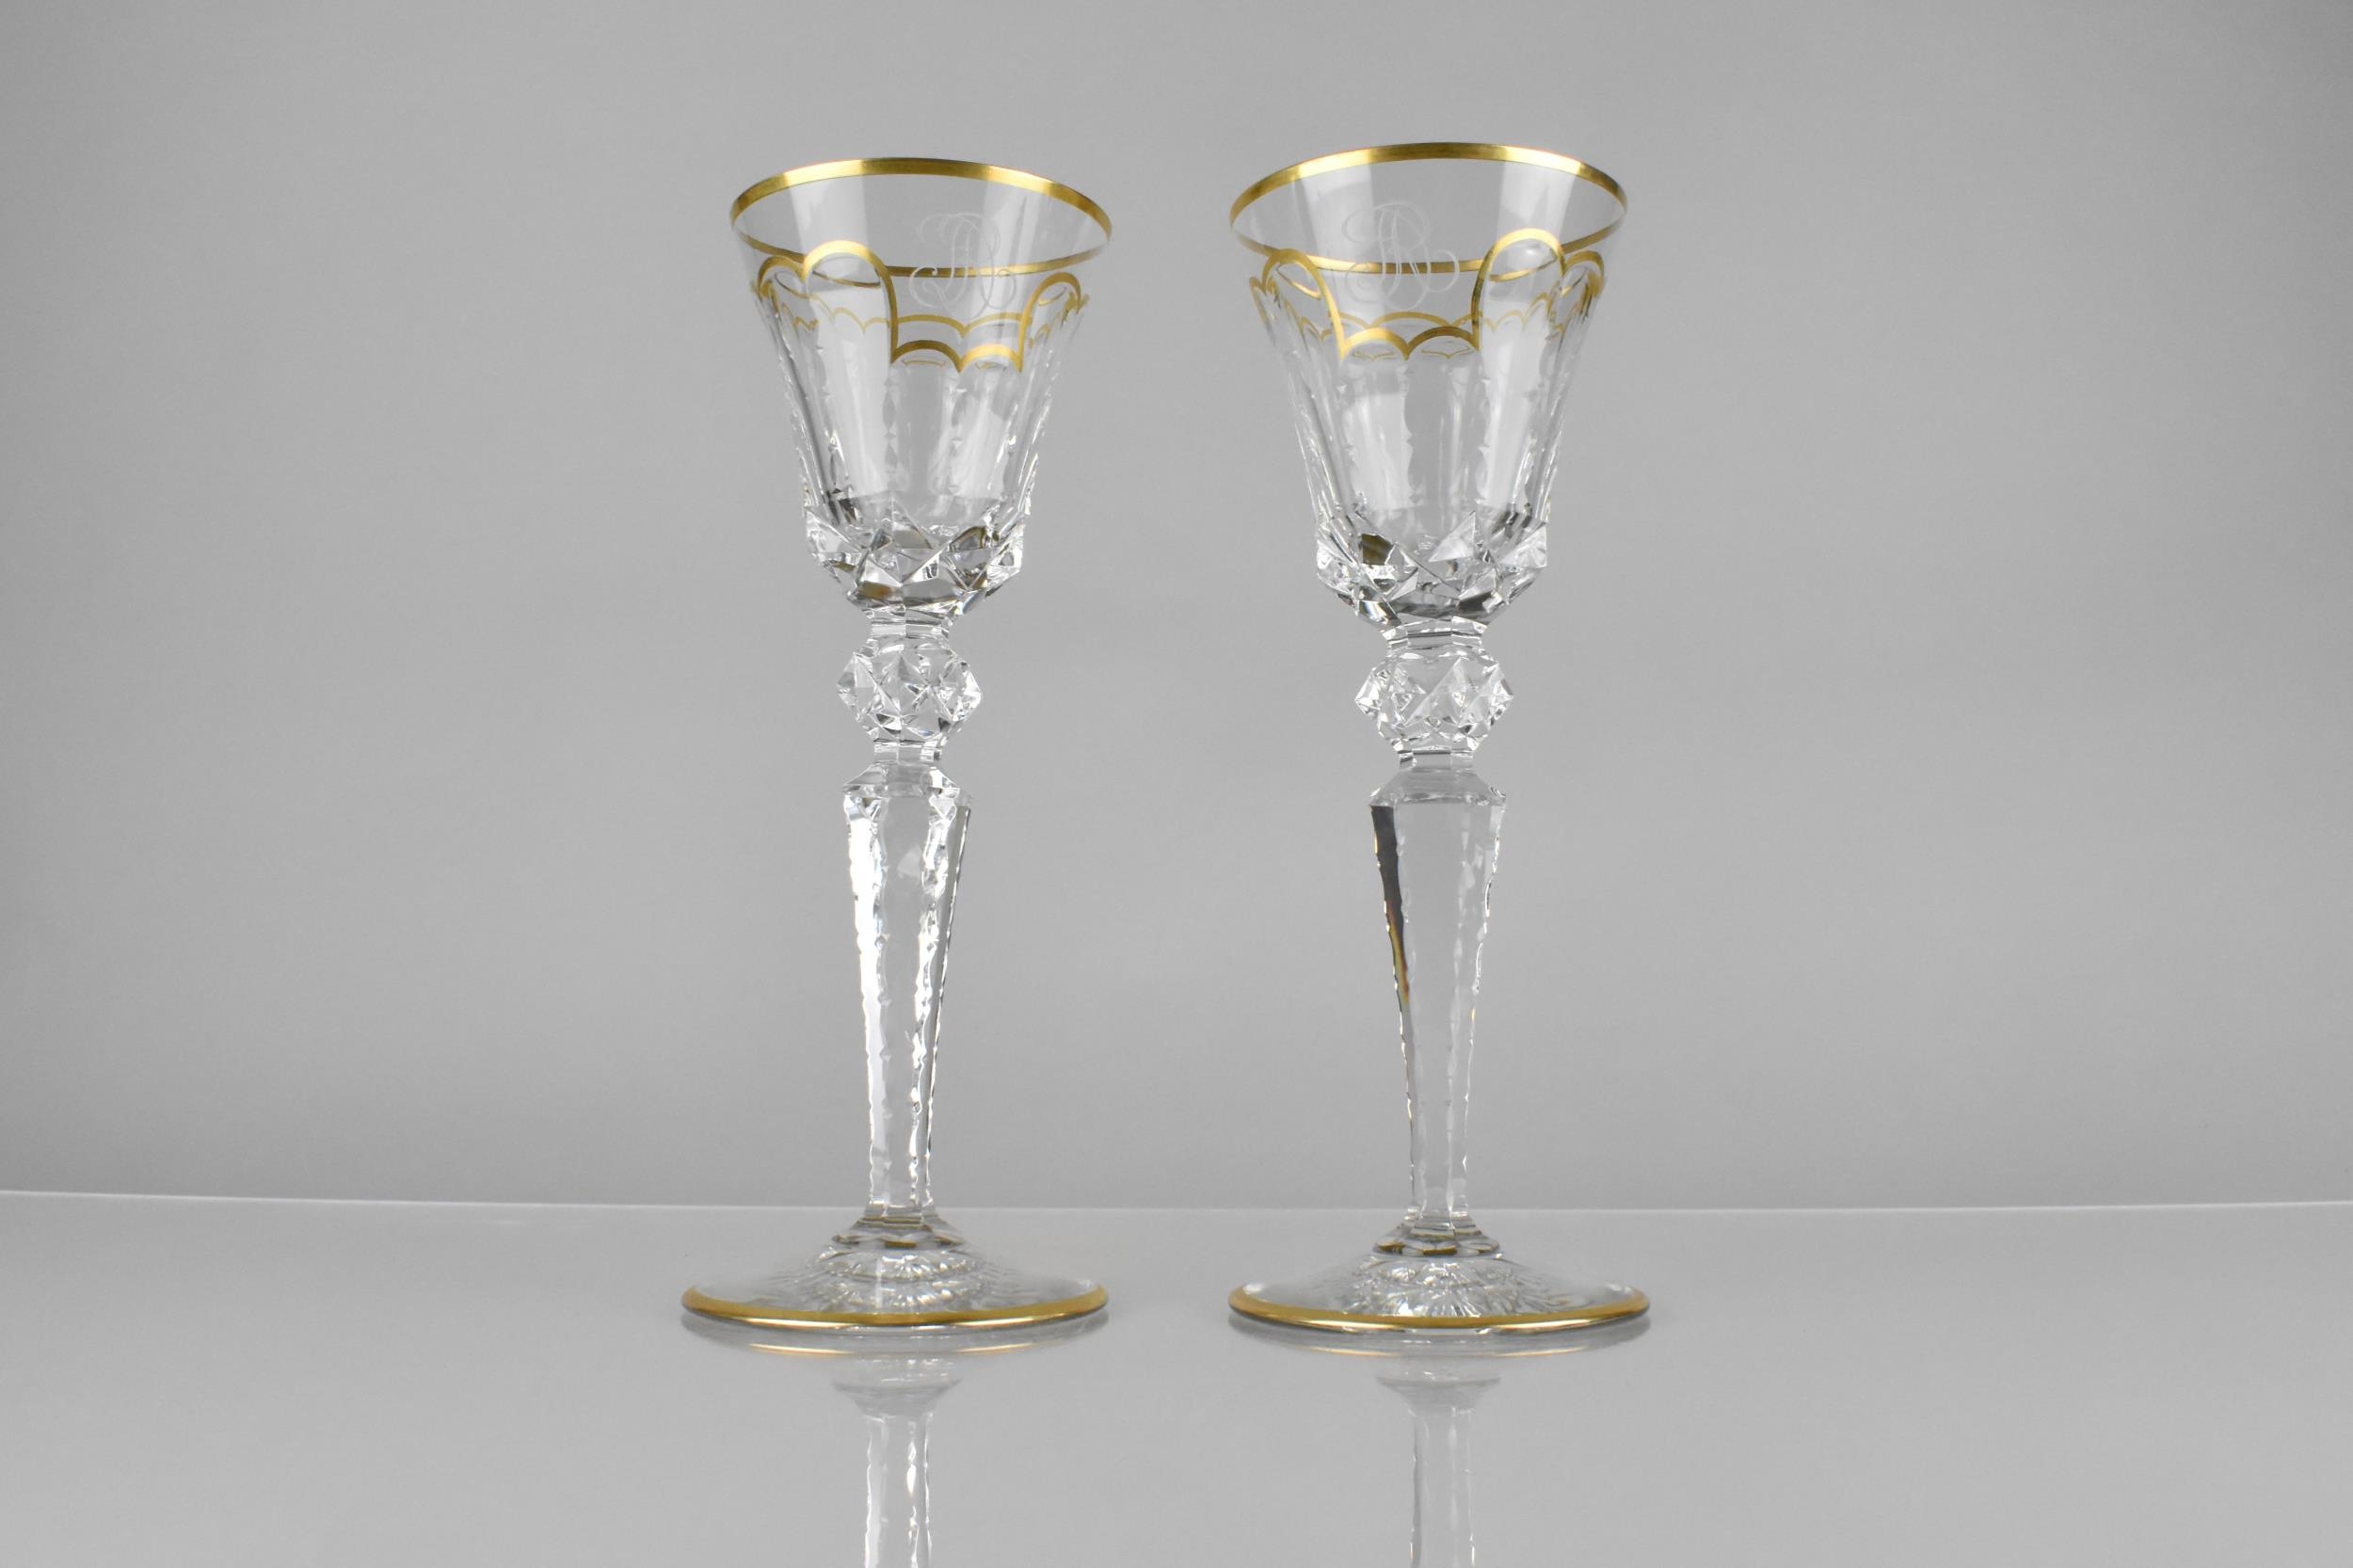 A Pair of St Louis Crystal Wine Glasses, the Facet-Cut Bowls with Gilt Trim and Scalloped Detail, - Image 3 of 3